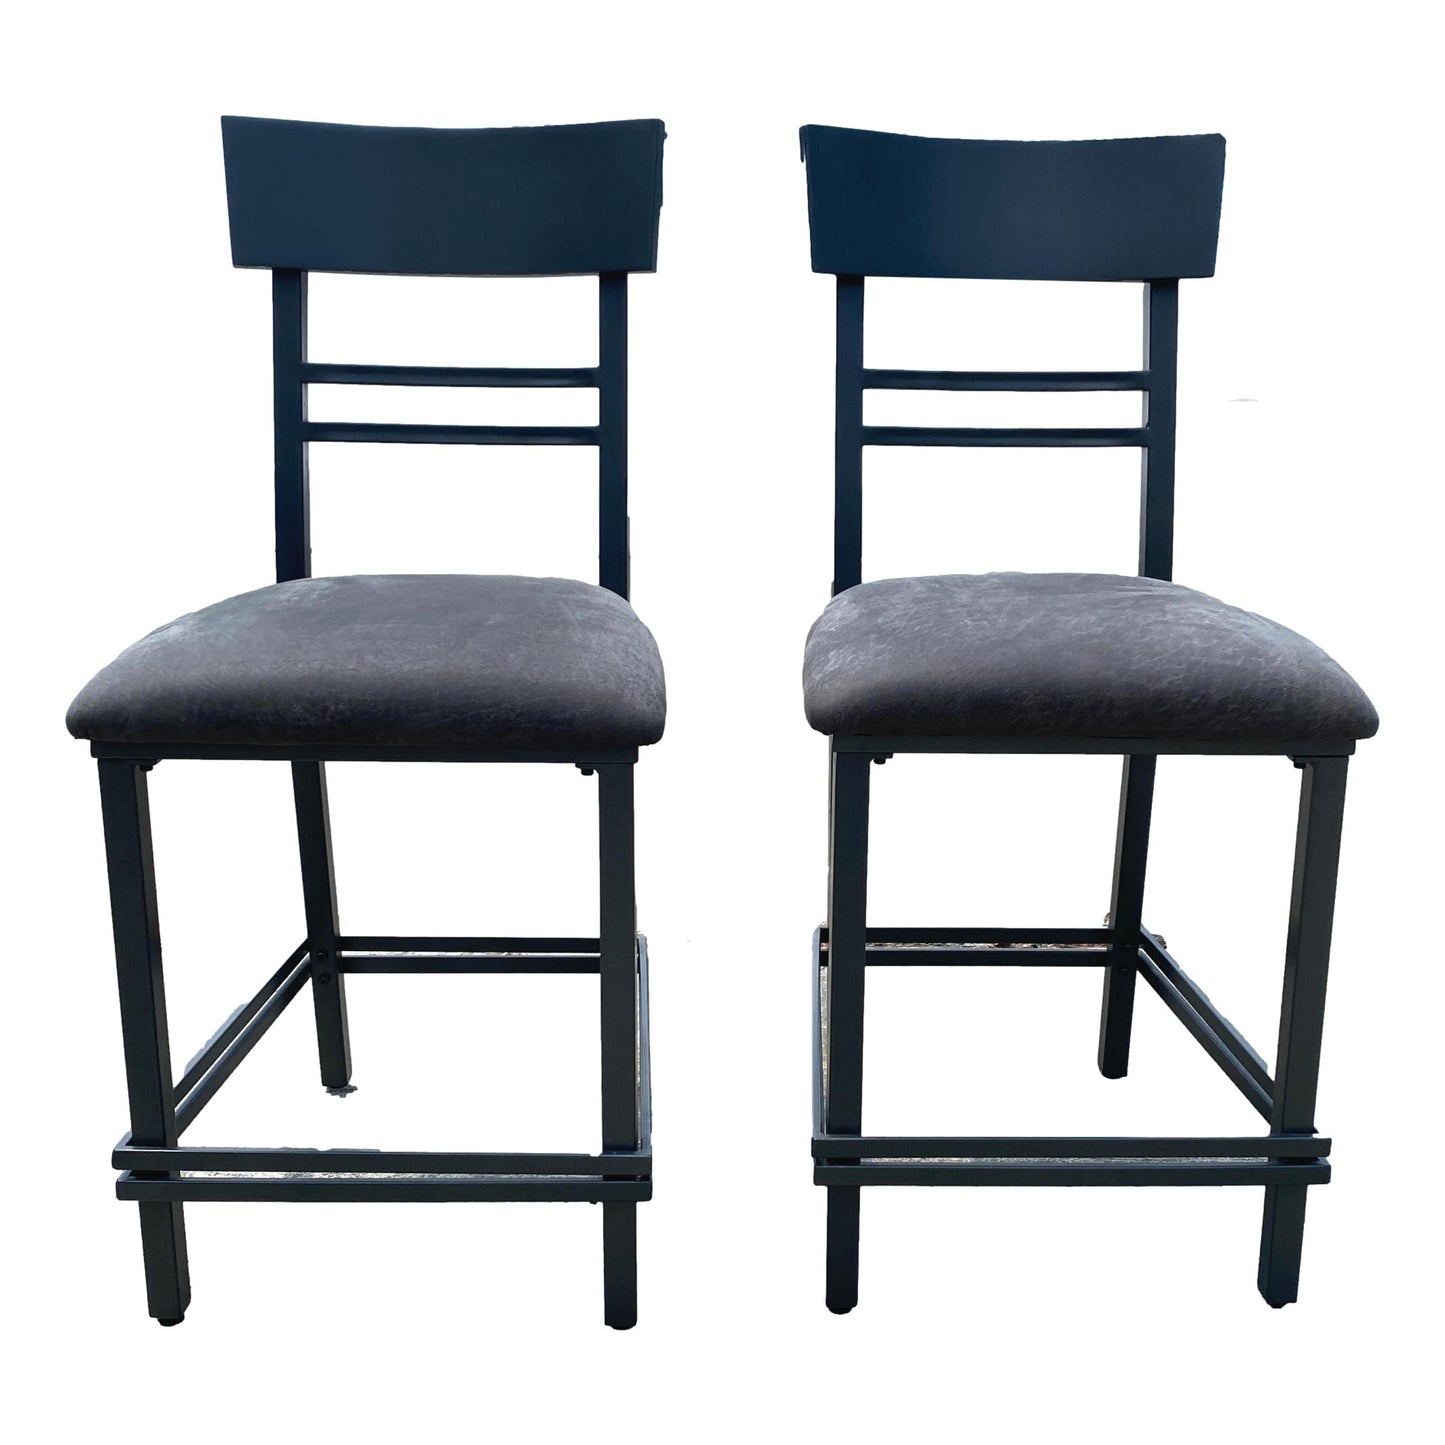 Pair of Black and Gray Barstools